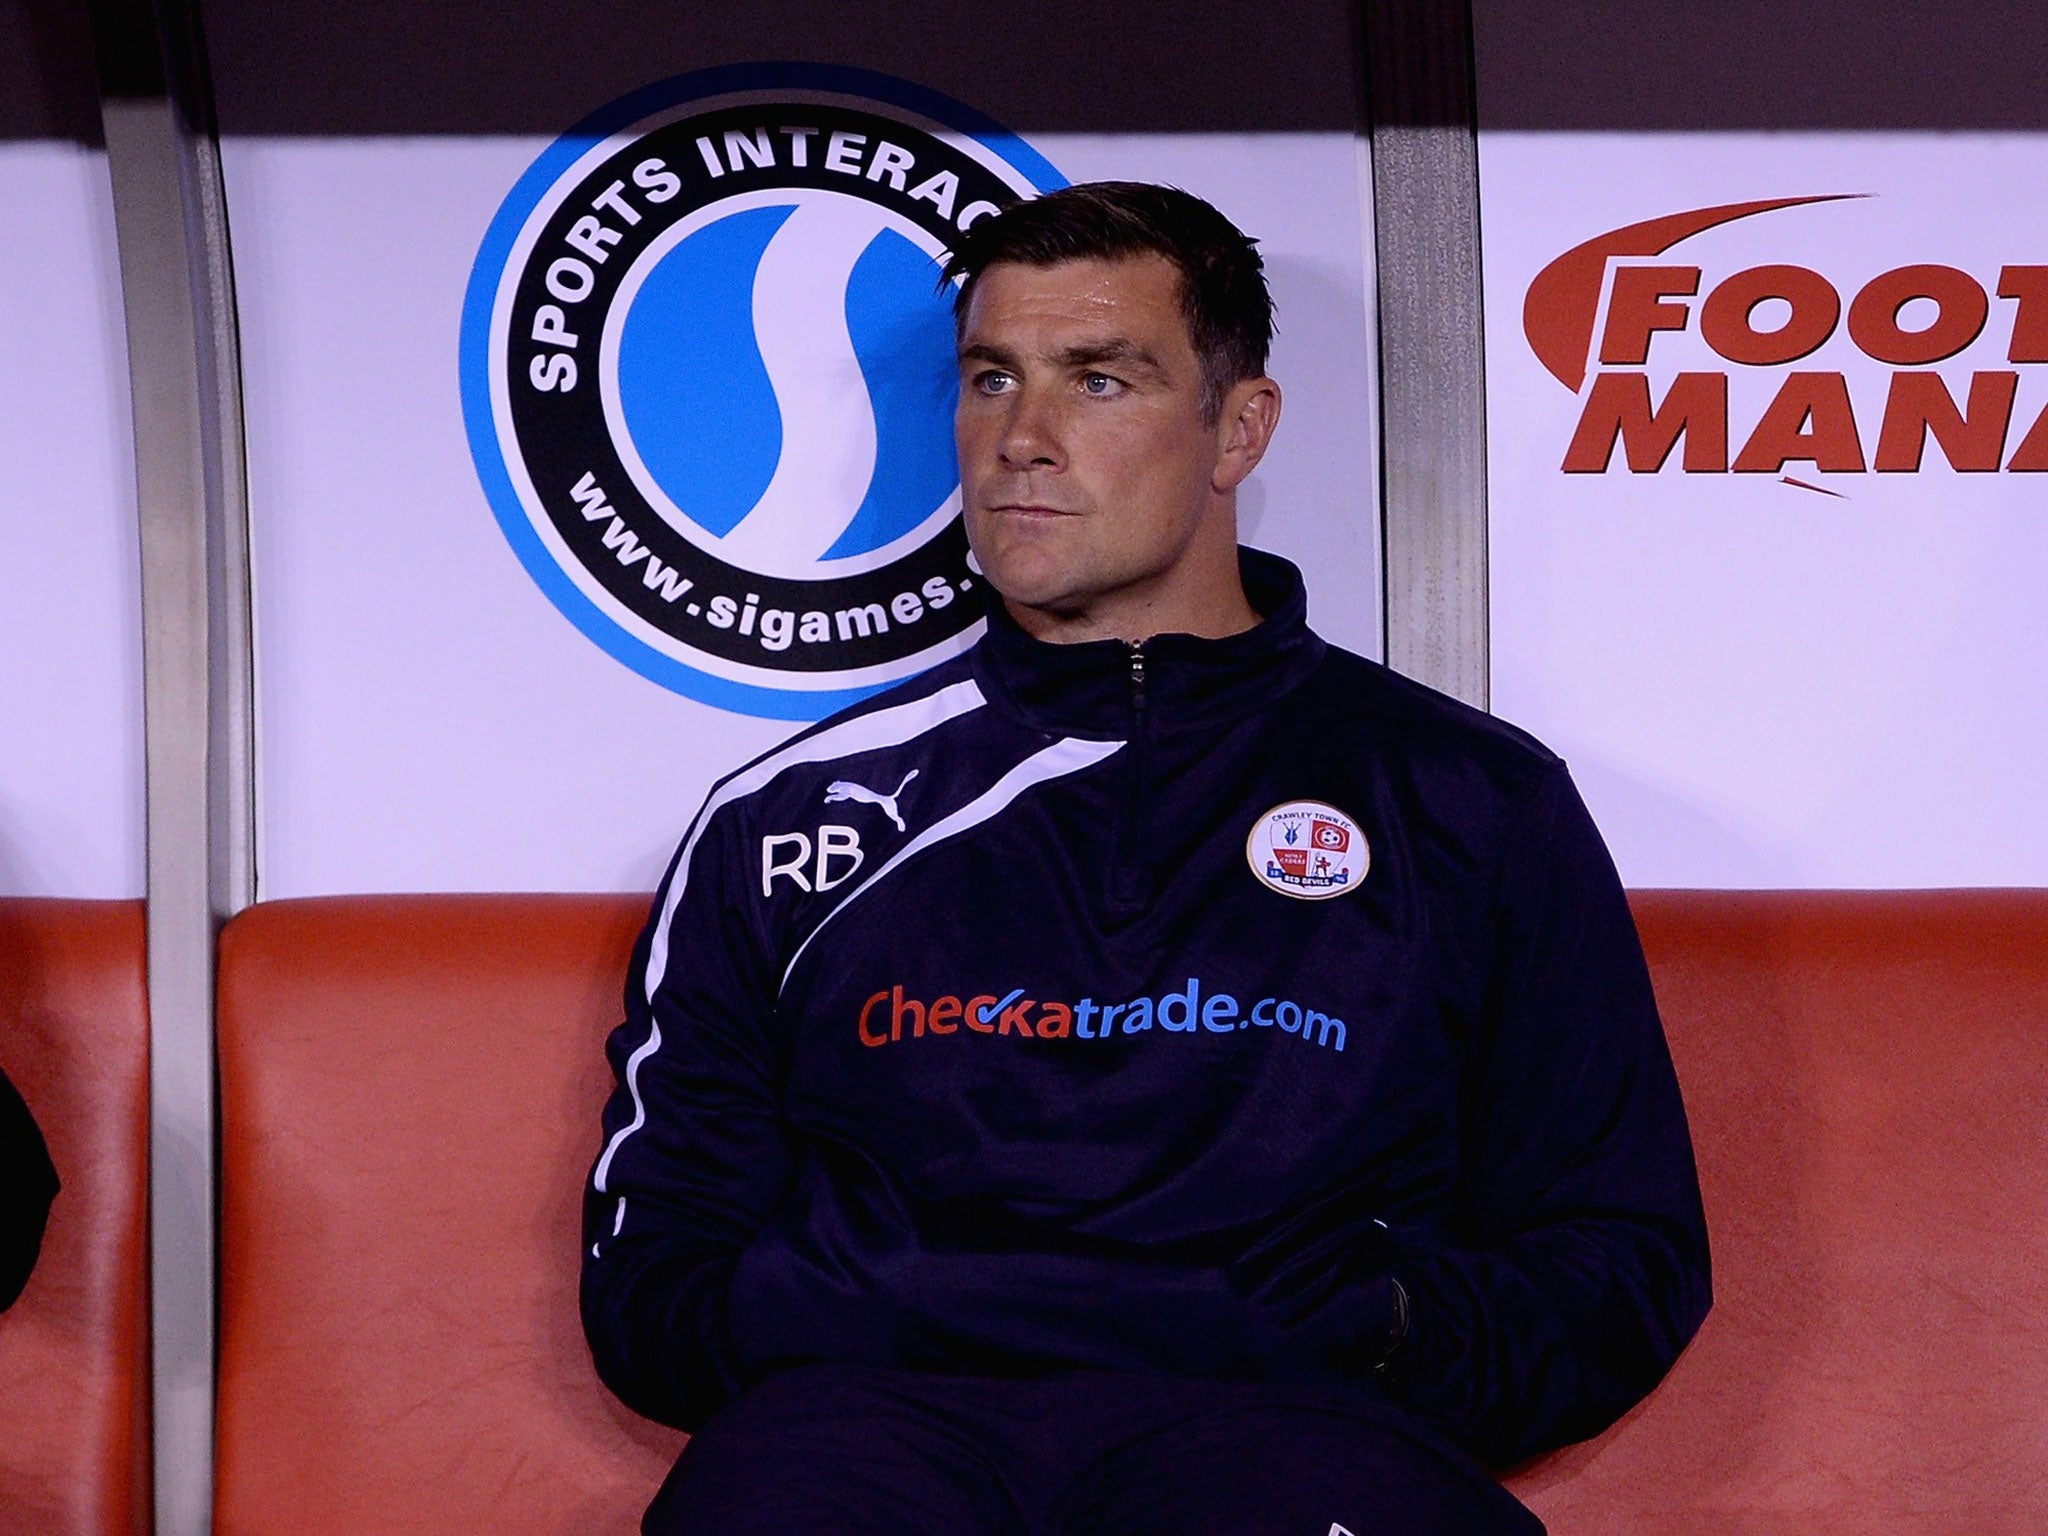 The Crawley Town manager Richie Barker is just 38 but has a catalogue of qualifications